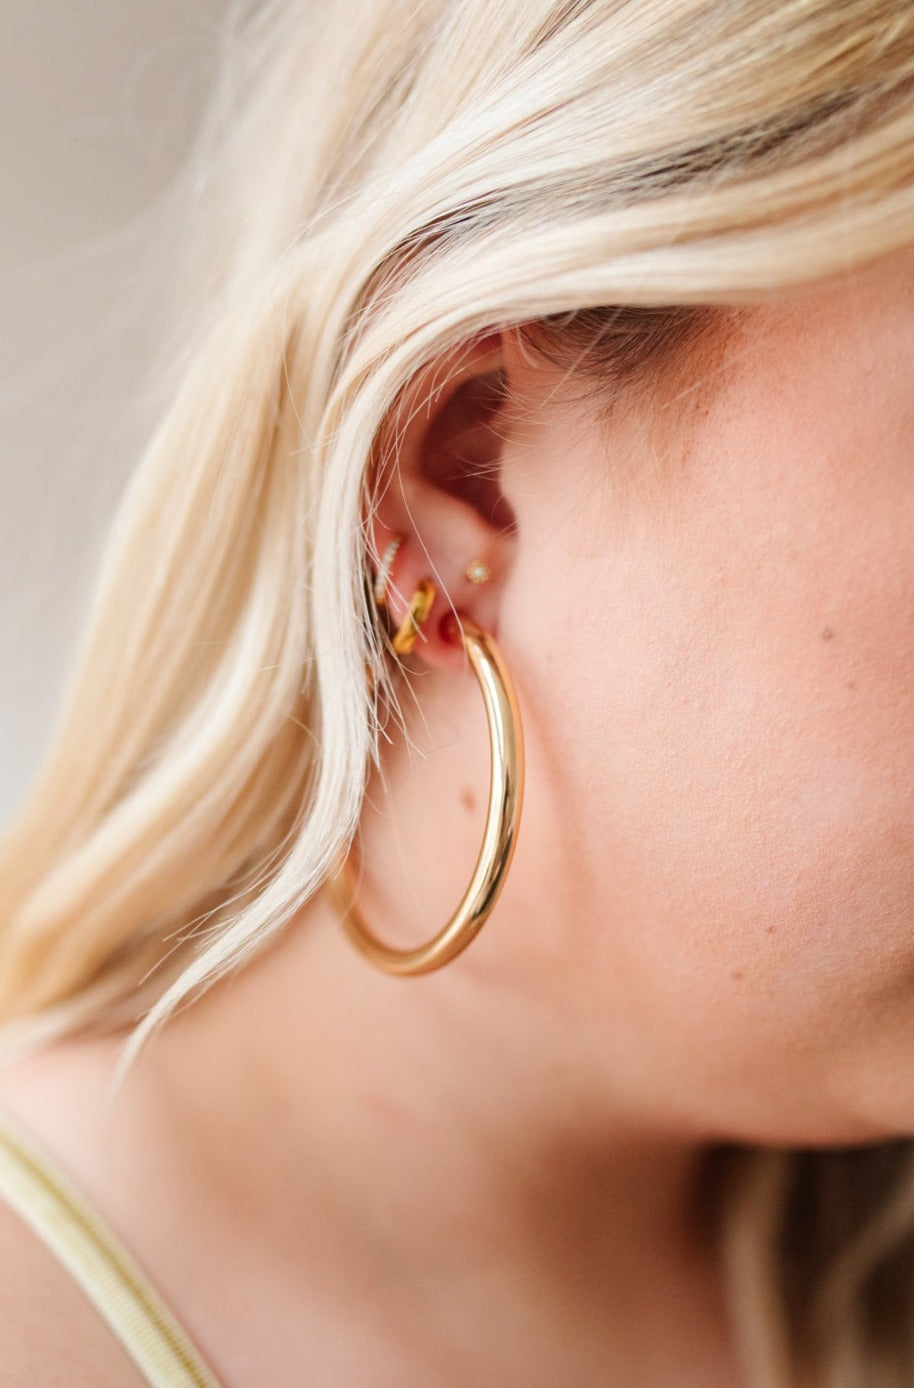 Solid Gold Hoops-Womens-Graceful & Chic Boutique, Family Clothing Store in Waxahachie, Texas